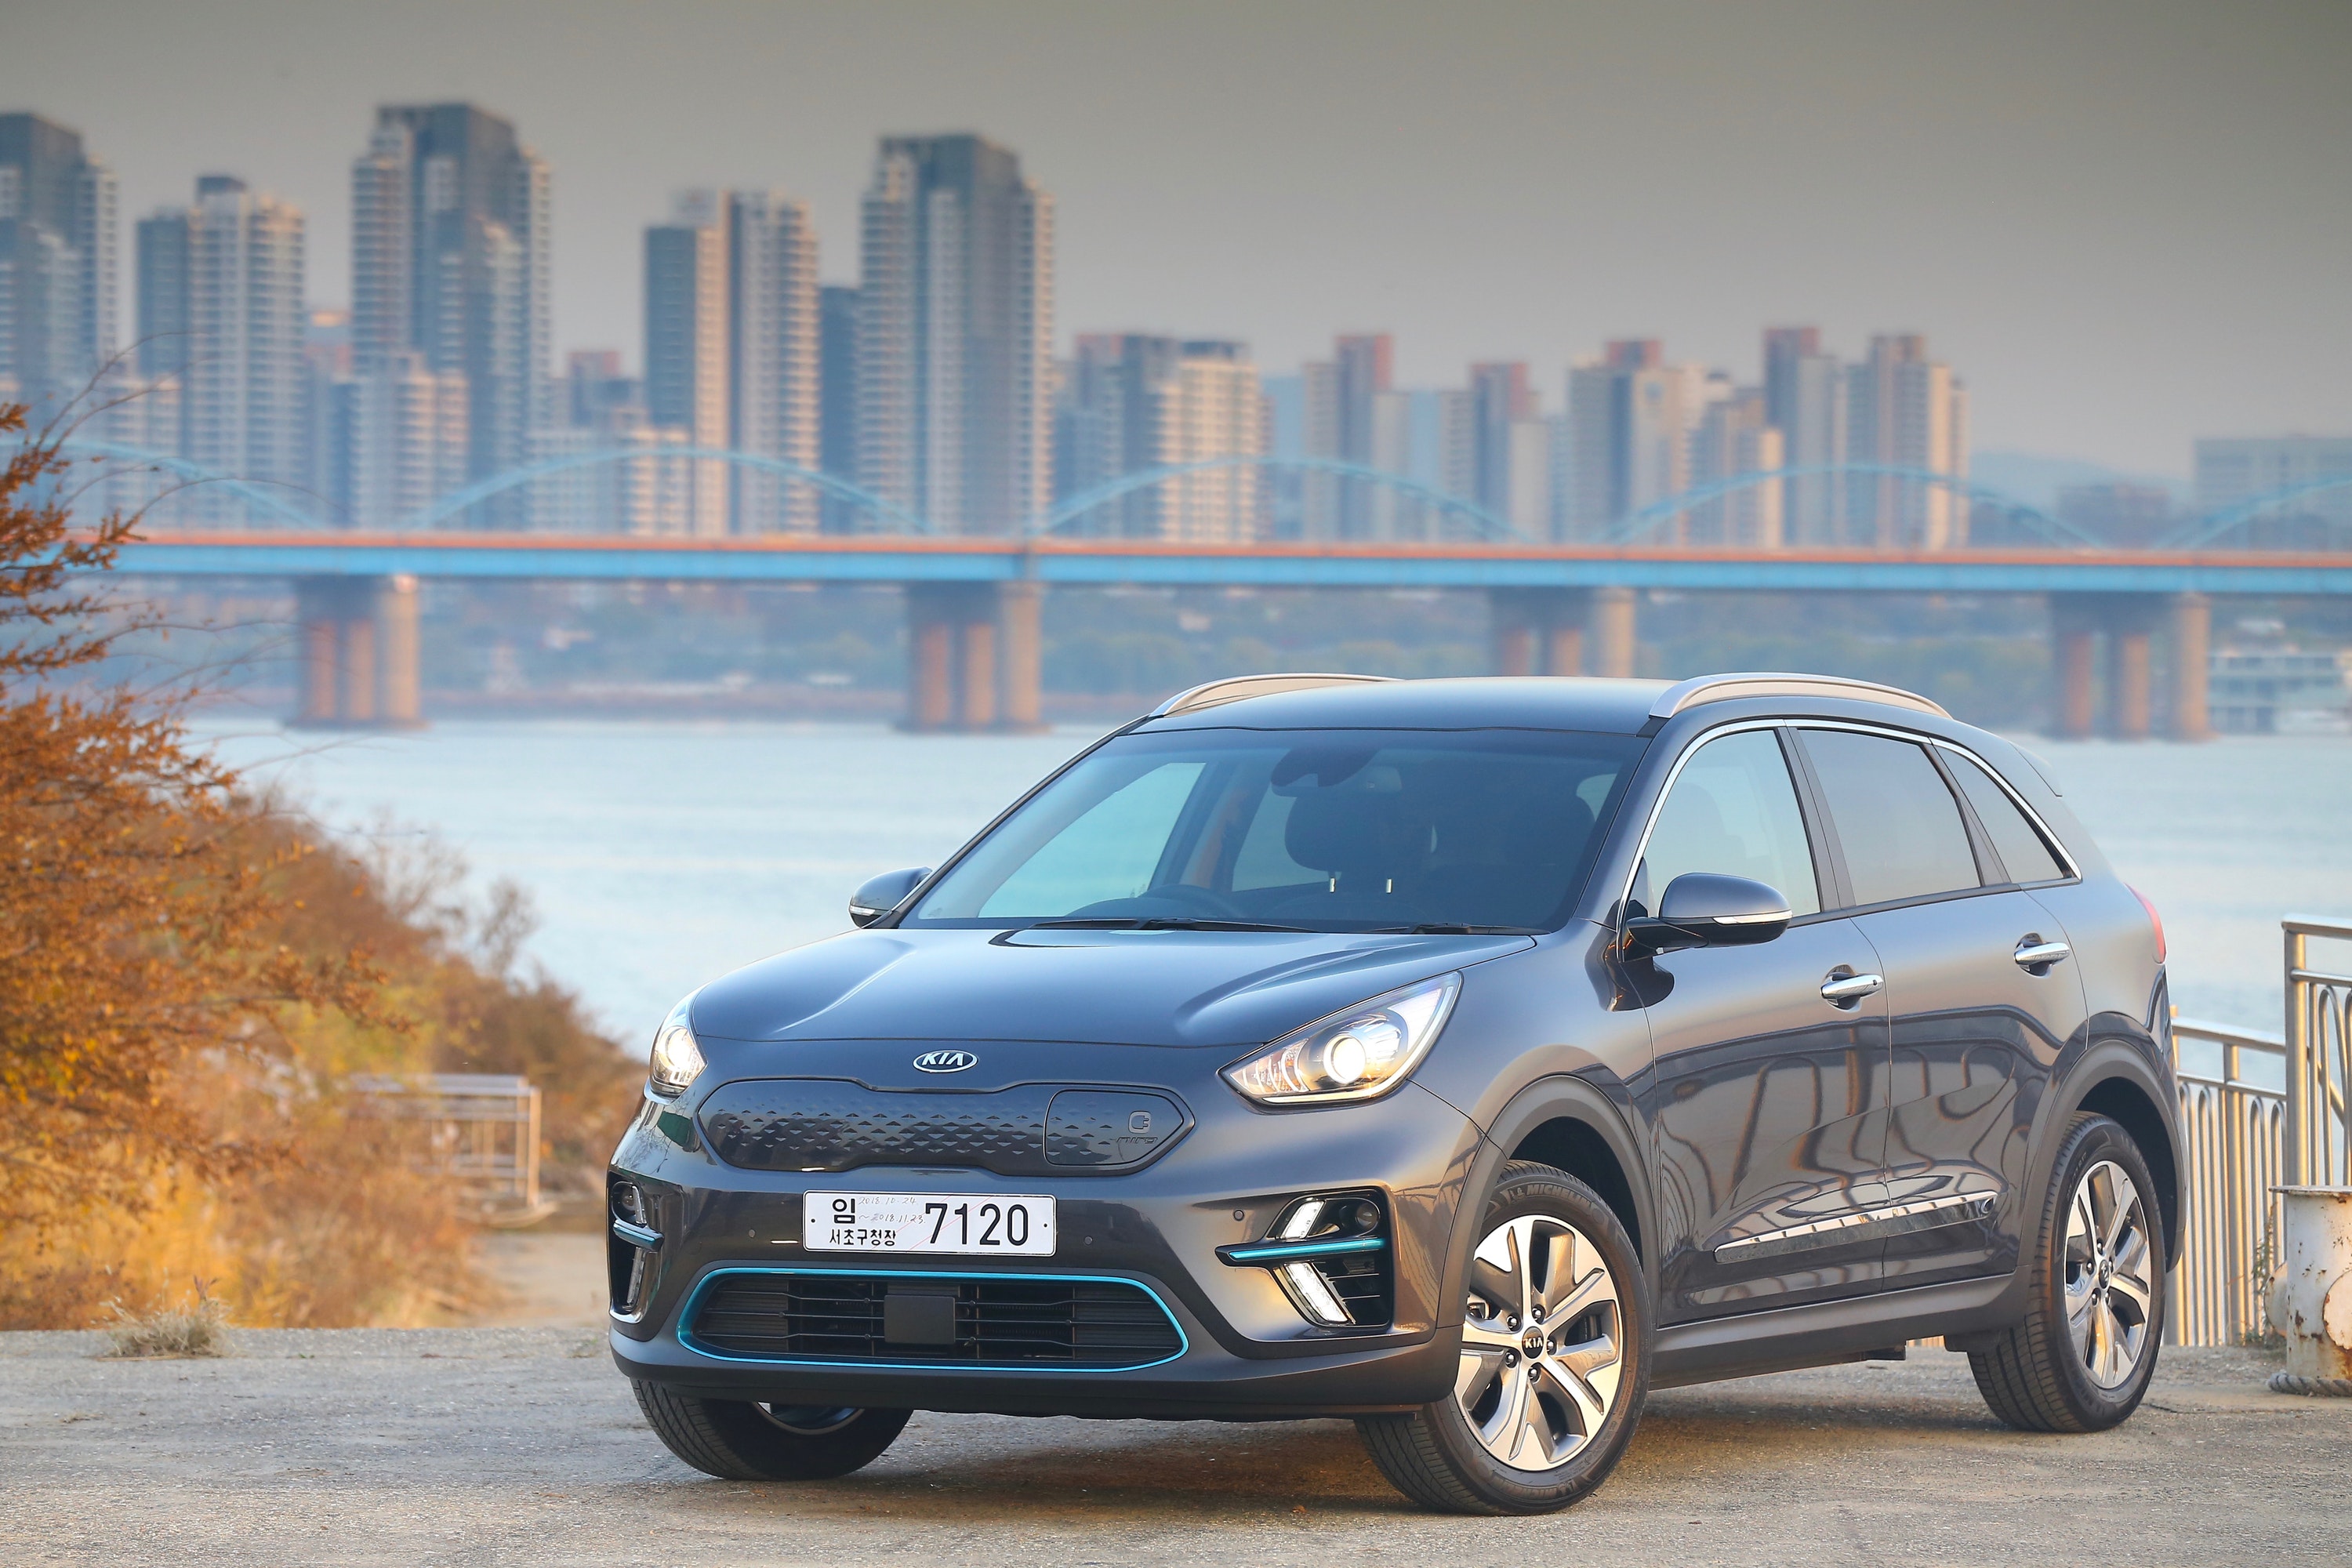 Full view of Kia e-Niro with city in the background